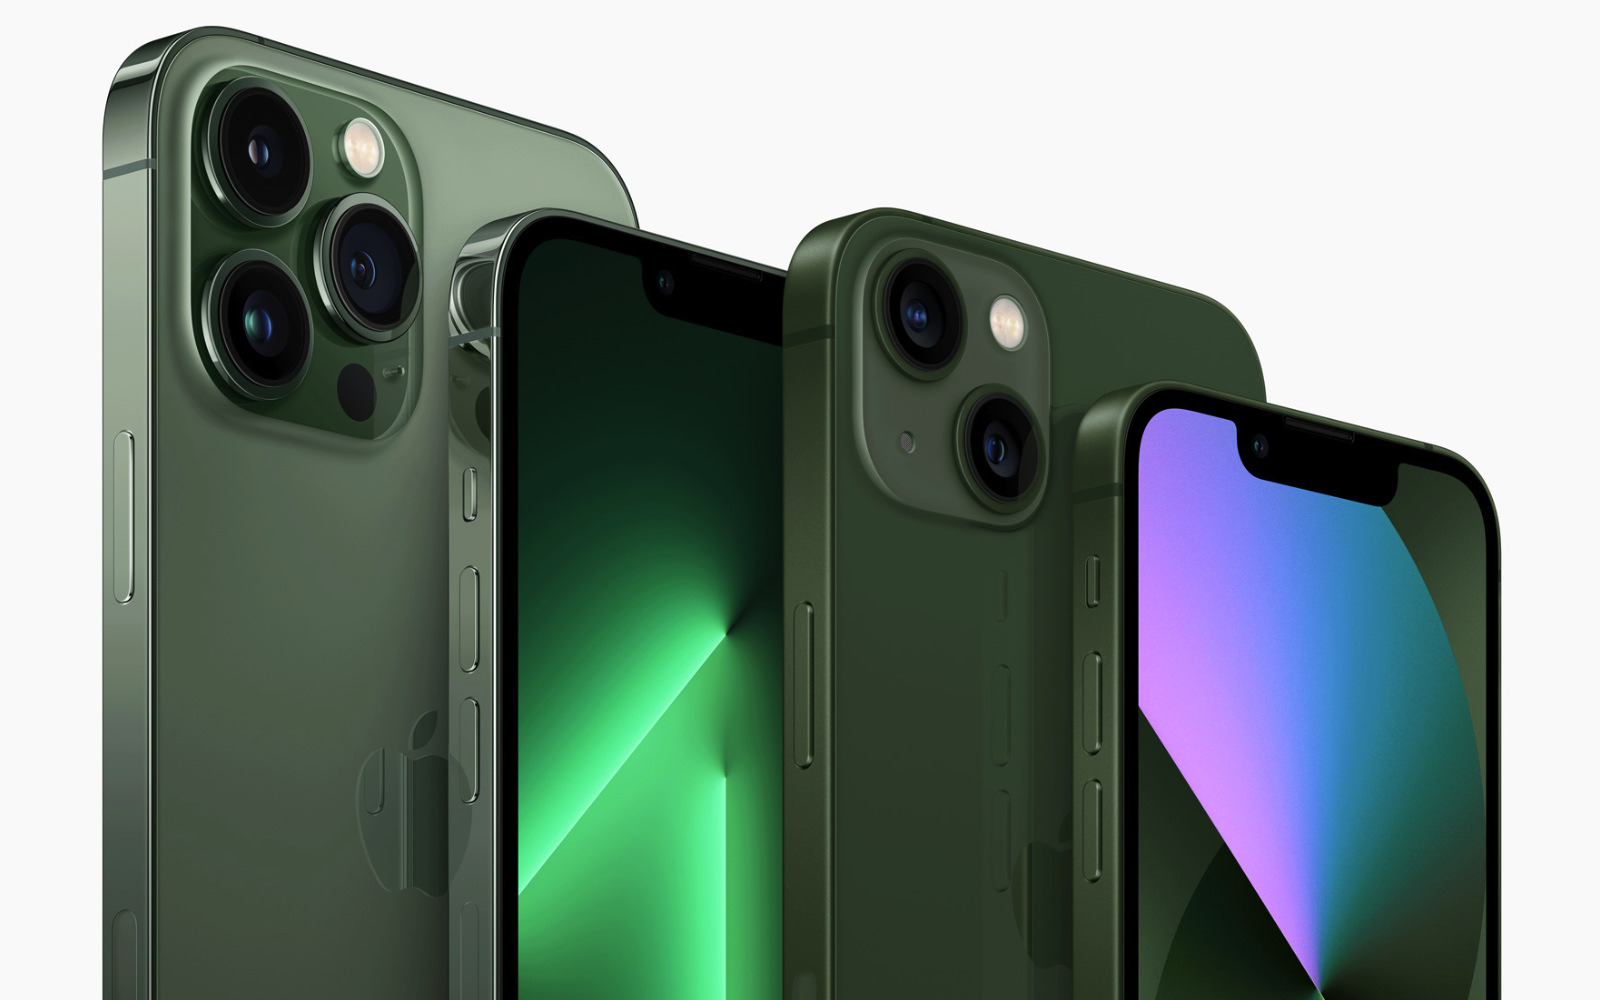 New-Green-Colors-for-iPhone13-Series.jpg